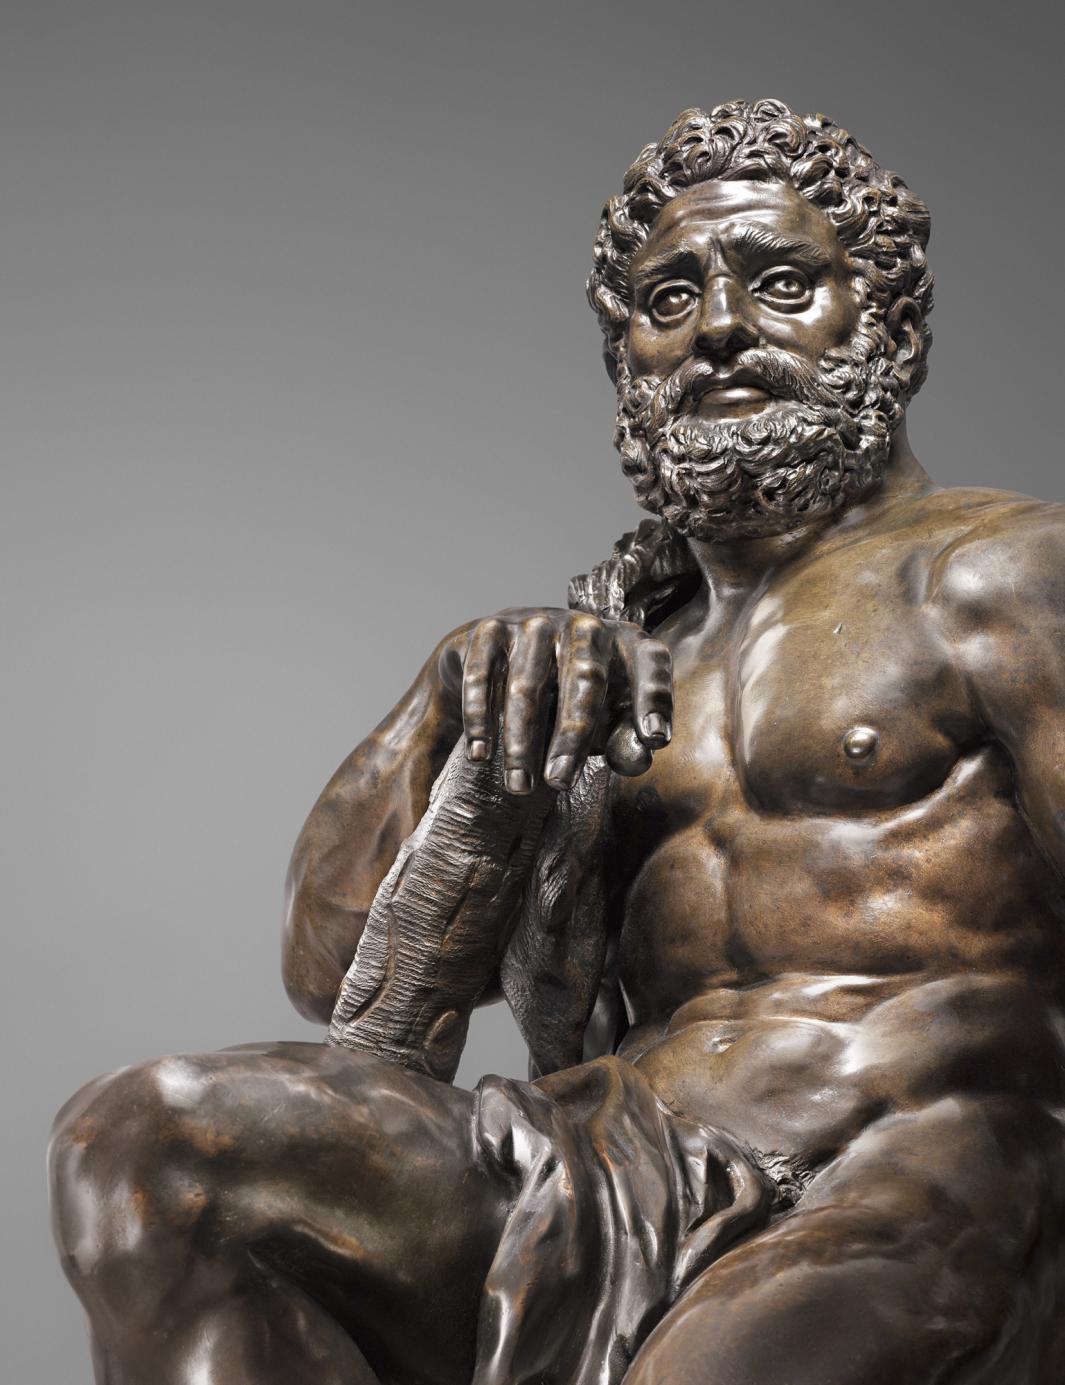 Bronze sculpture of seated male figure with a club, detail of face.  